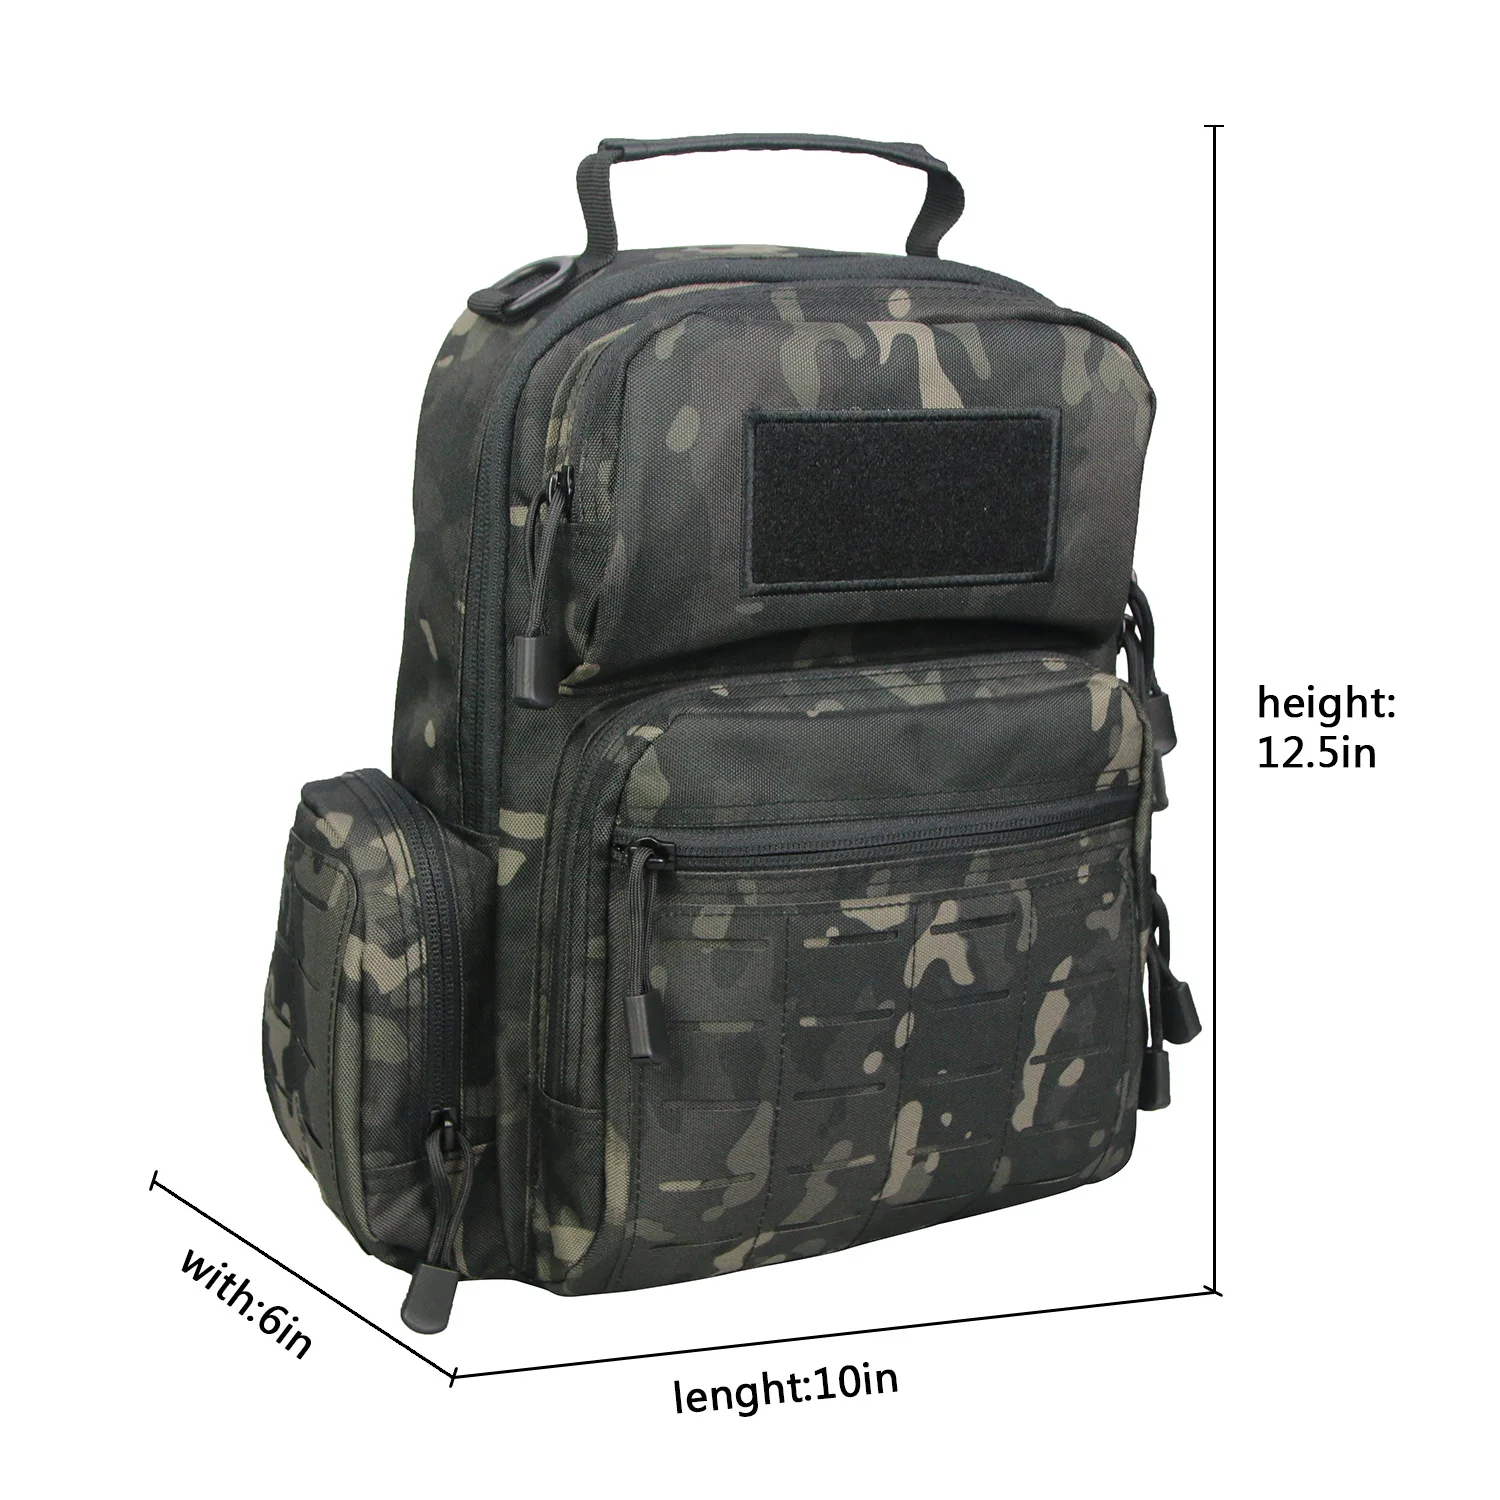 

Sport Fasion Highland Tactical Military Tactical Outdoor Waterproof Backpack Bag, Black multicam